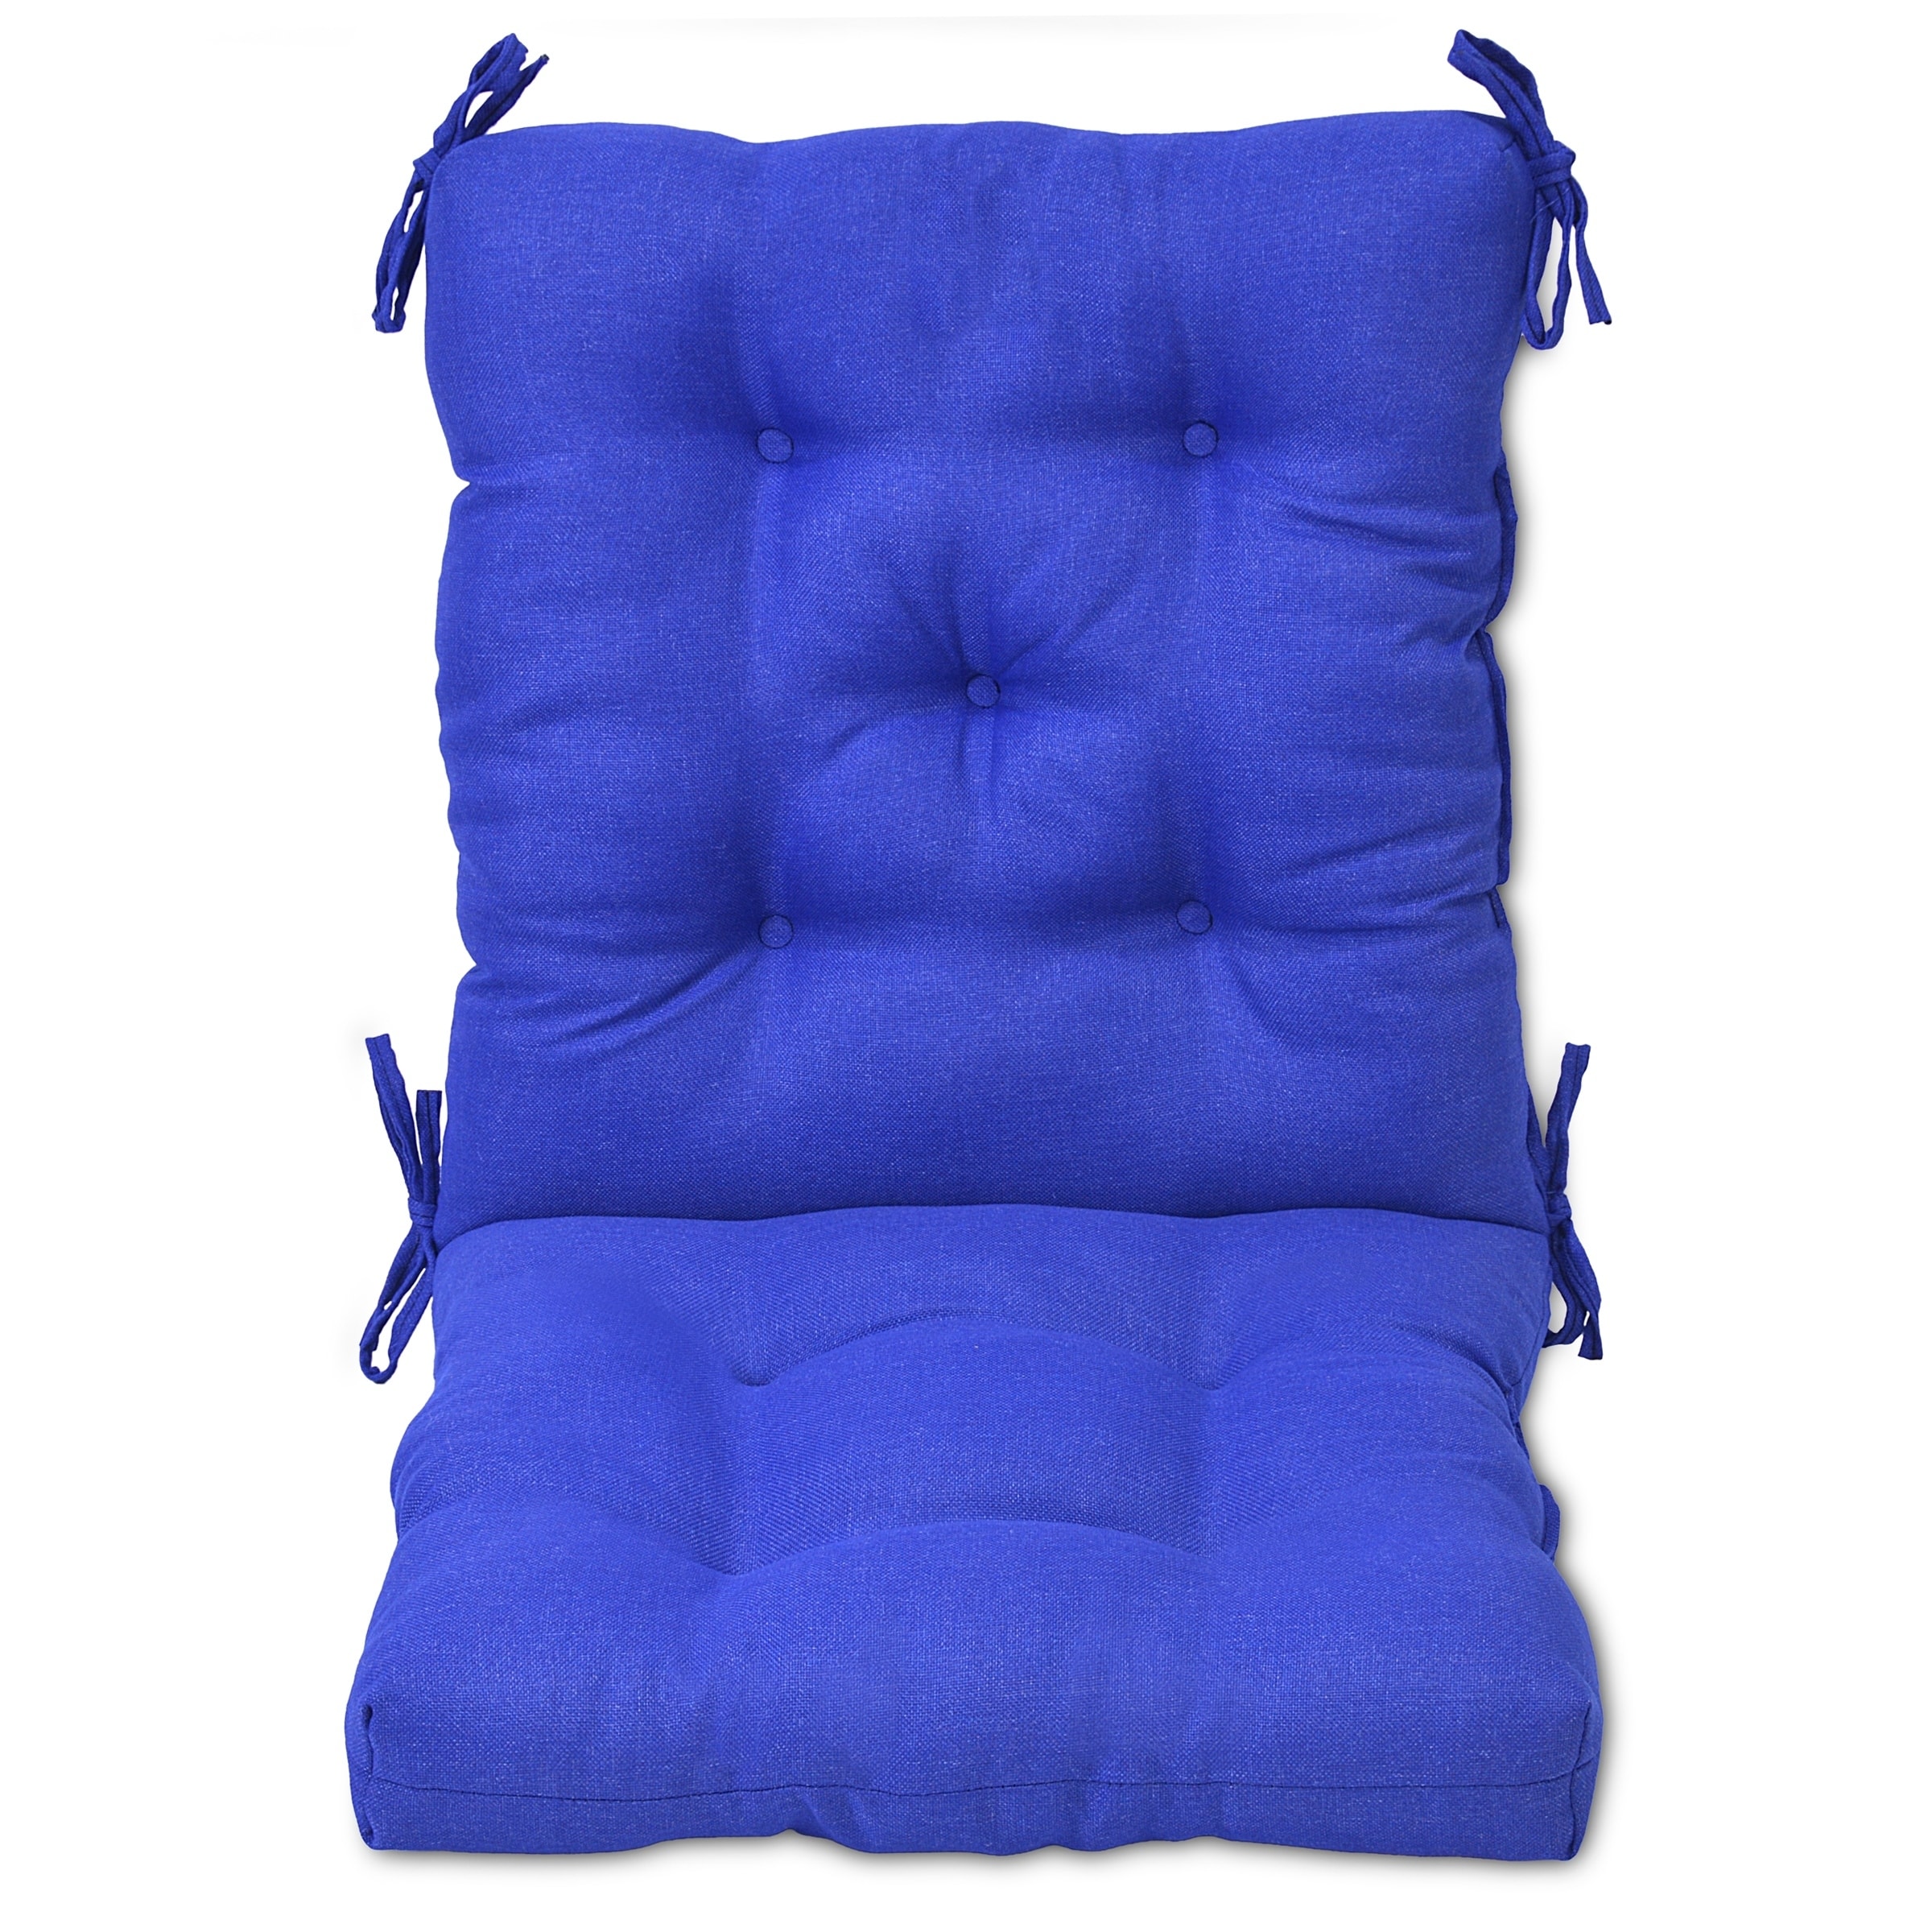 BLISSWALK Patio Chair Cushion for Adirondack High Back Tufted Seat Chair  Cushion Outdoor 48 in. x 21 in. x 4 in. Blue WGB09 - The Home Depot